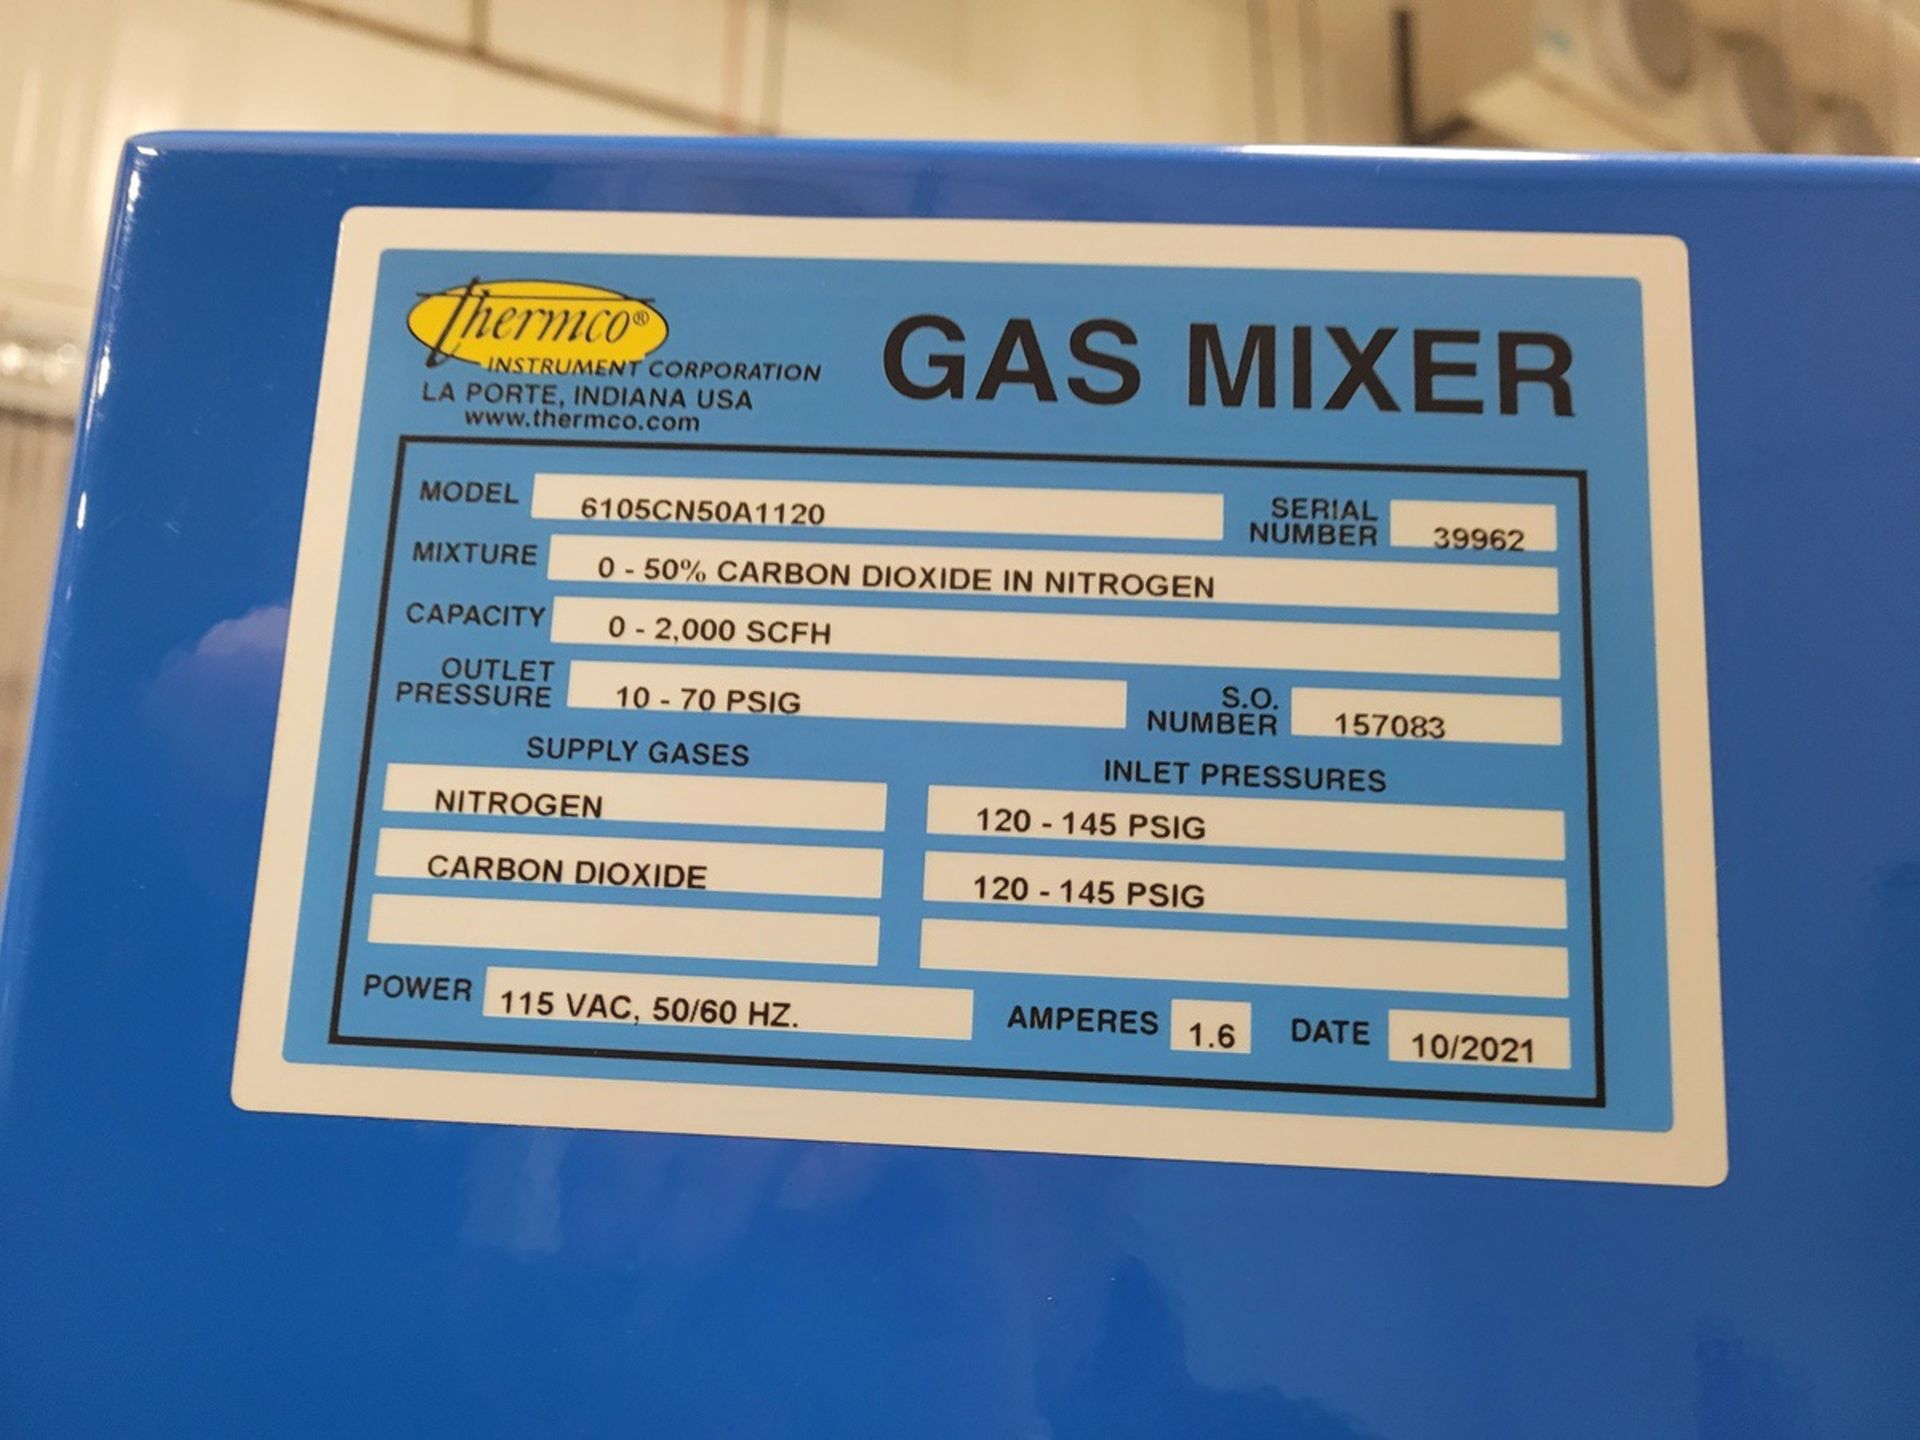 2021 Thermco 6105CN50A1120 Gas Mixer 115 v, 50/60 Hz, 1.6 AMPS, 0-50% Carbon Dioxid | Rig Fee $350 - Image 9 of 9